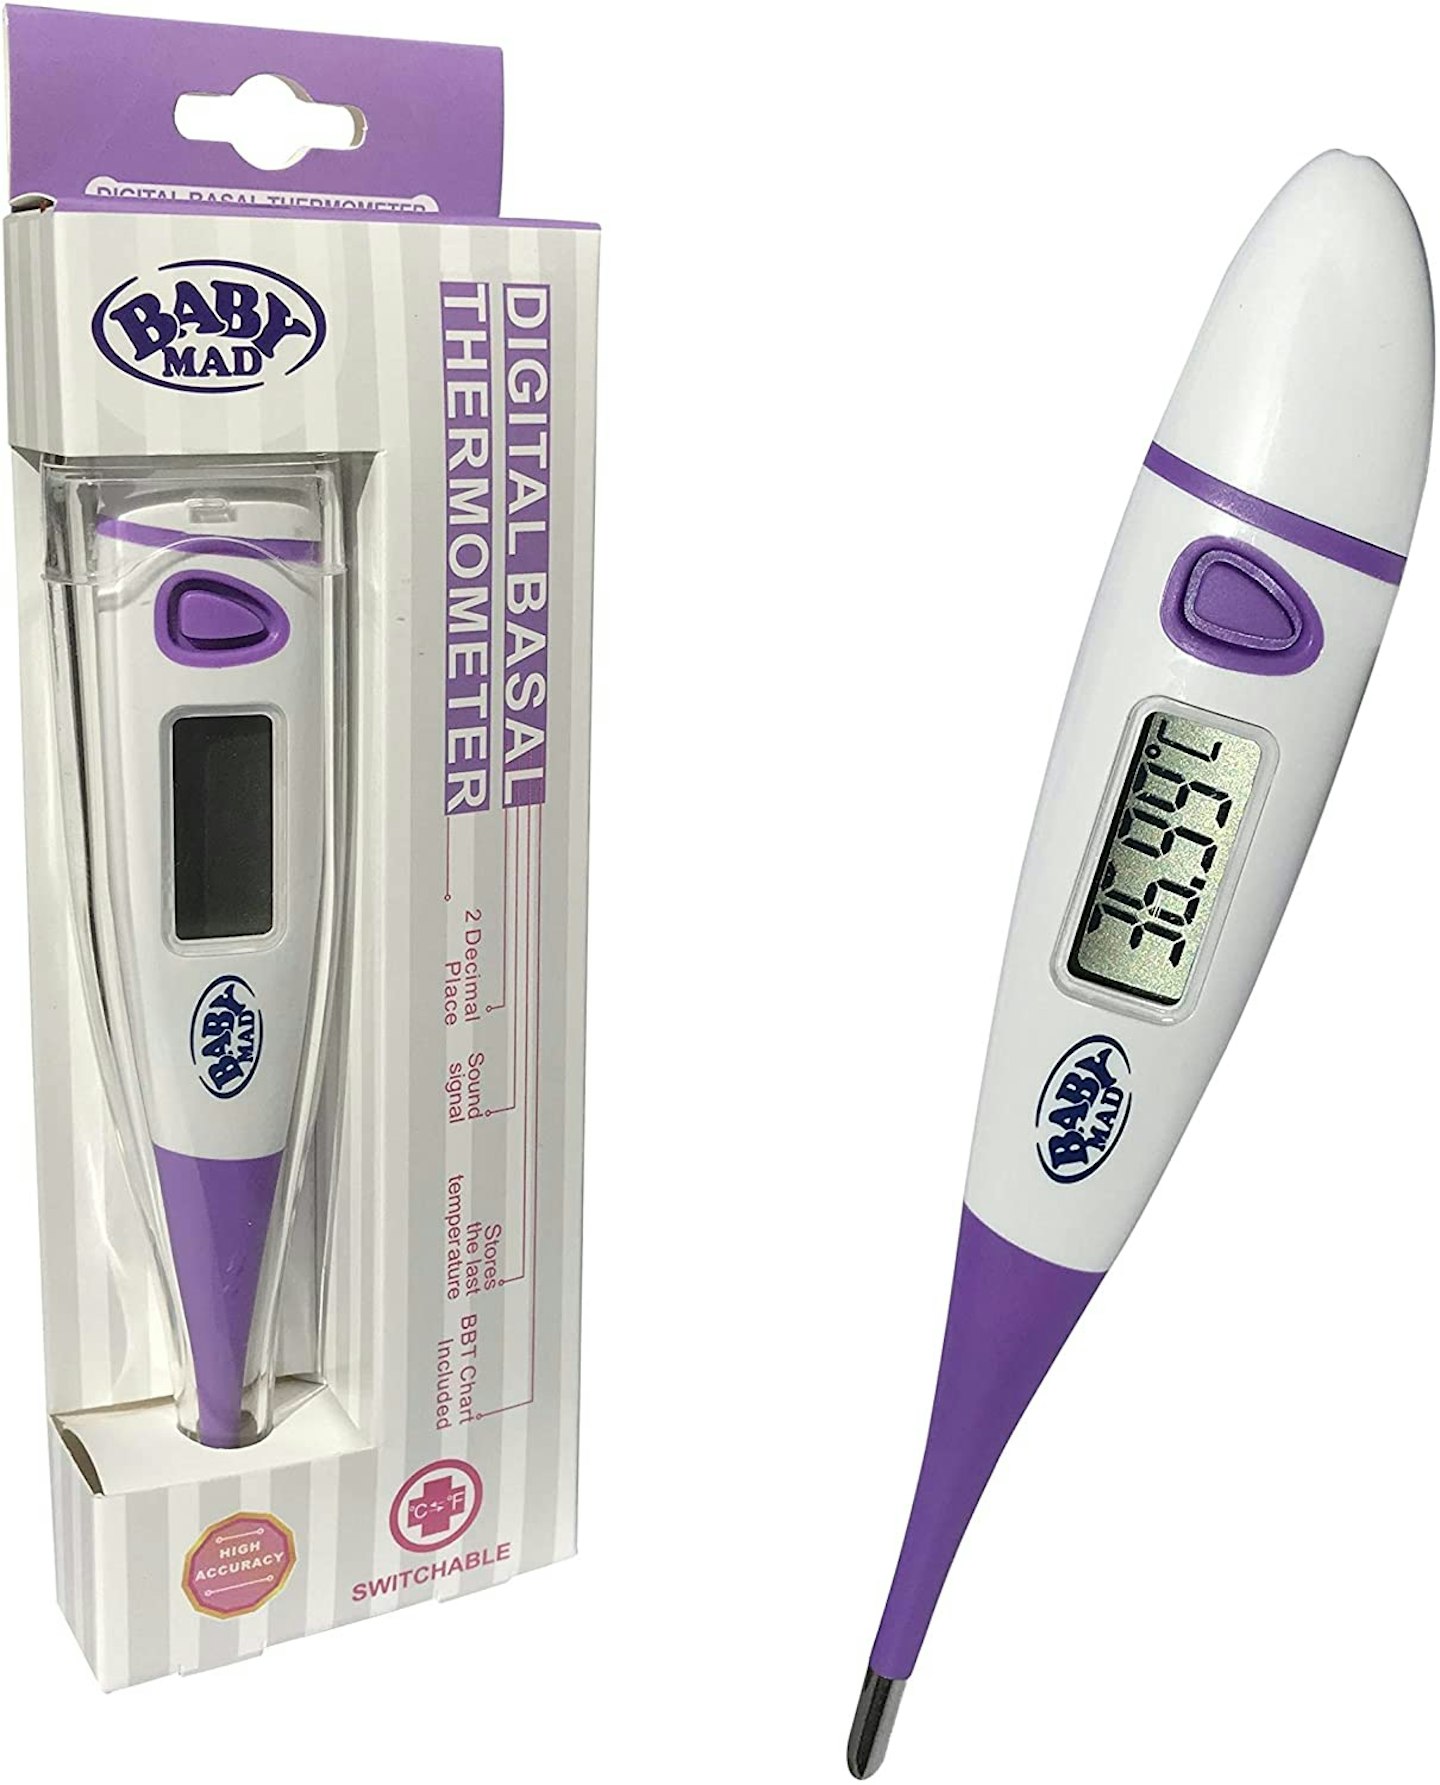 BabyMad Basal Thermometer with Storage Case